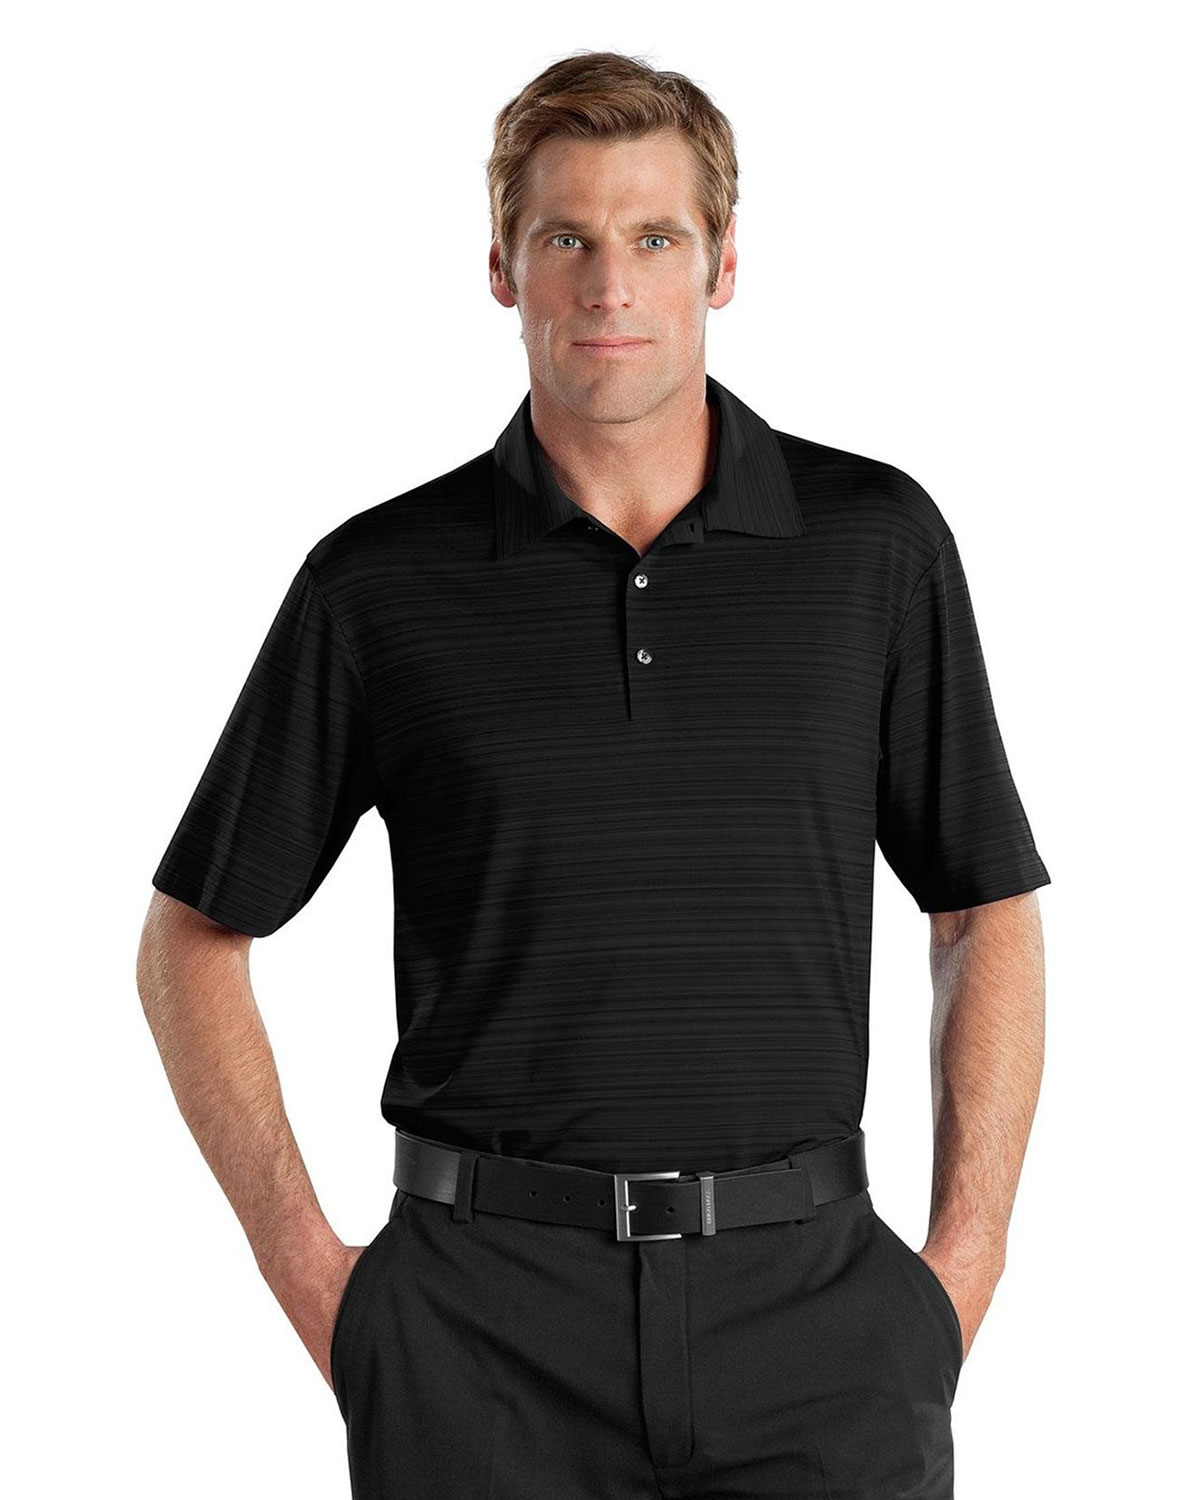 NIKE - Top of the line Corporate Apparel - Verified Label